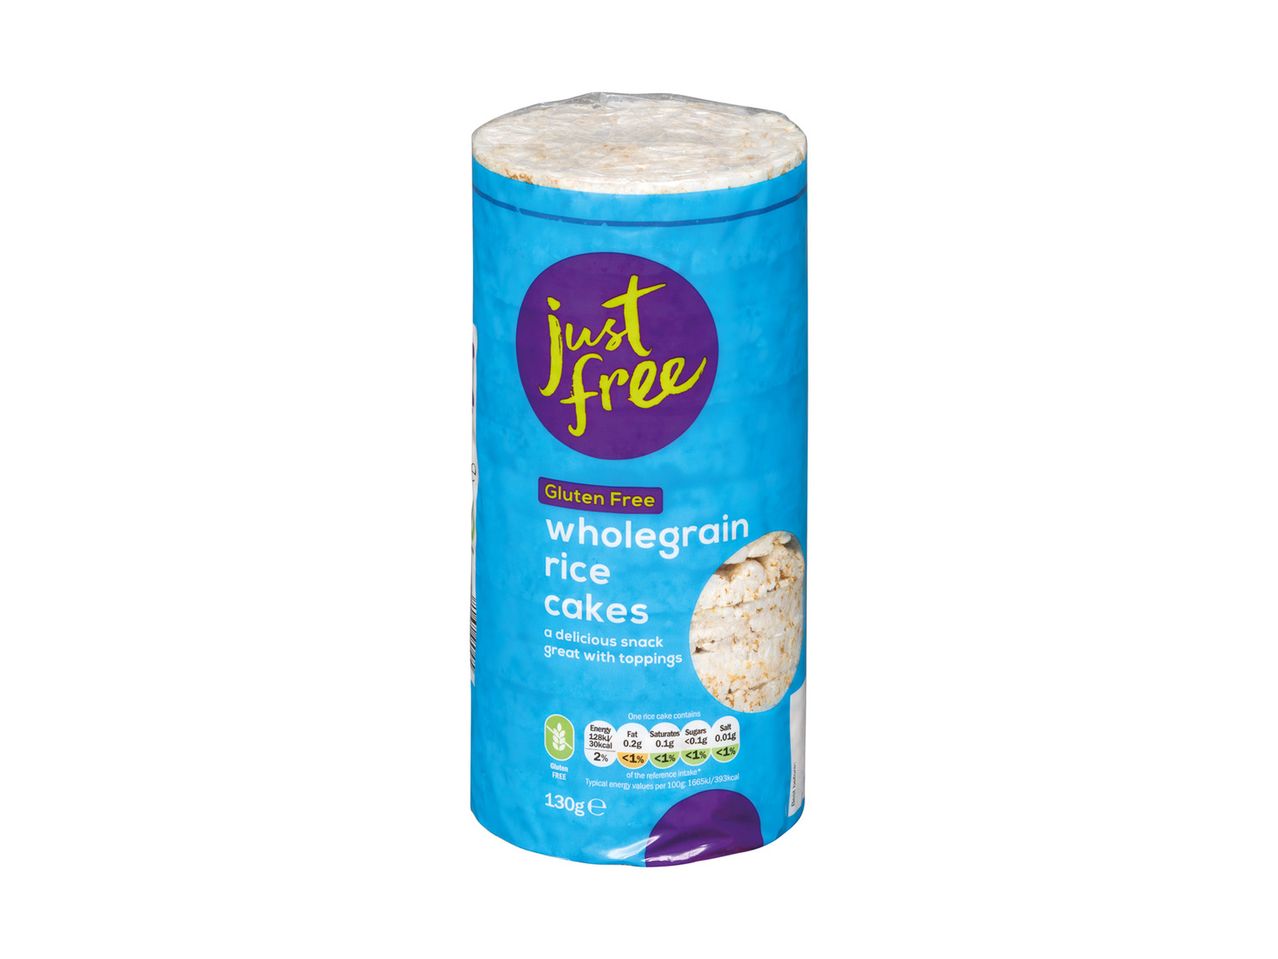 Go to full screen view: Just Free Corn Cakes or Wholegrain Rice Cakes - Image 1